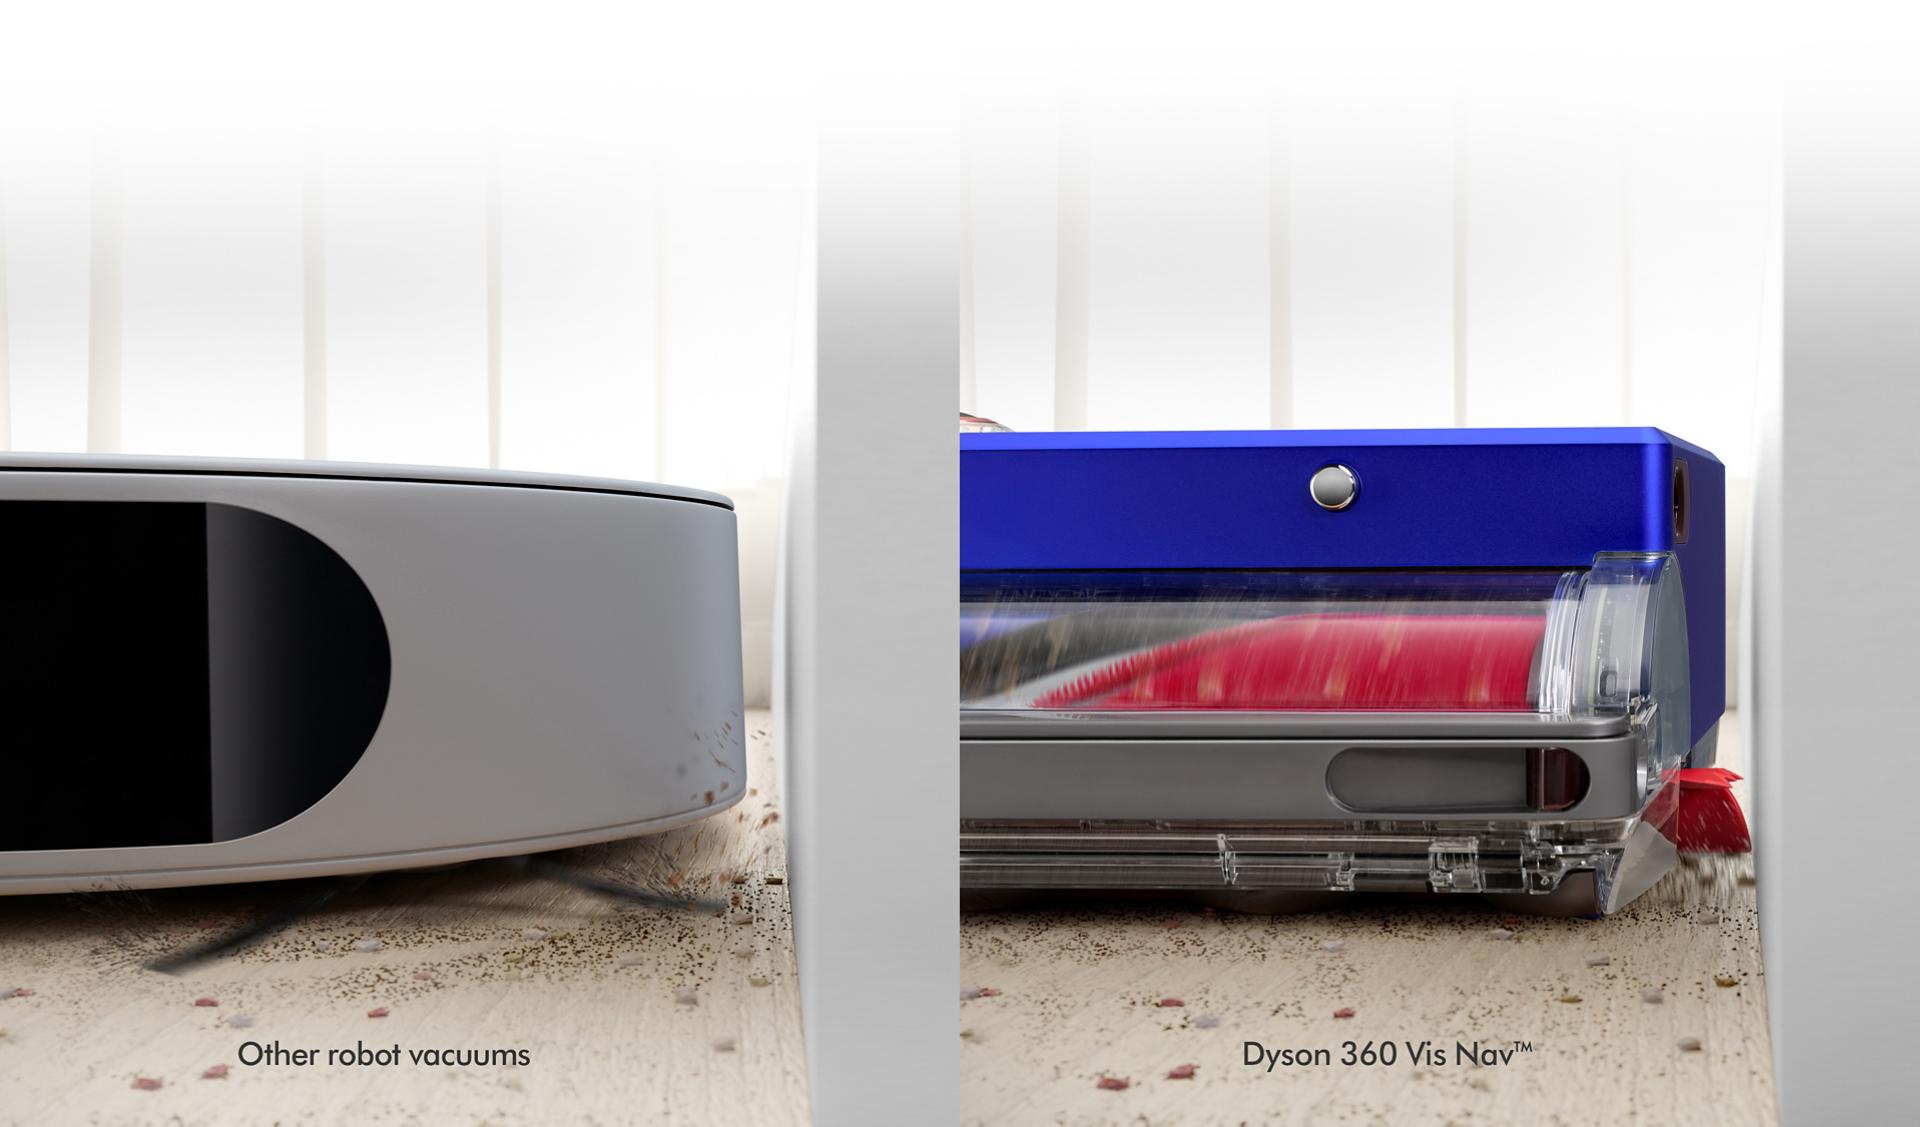 Other robot vacuum vs the Dyson 360 Vis Nav robot cleaning along a wall